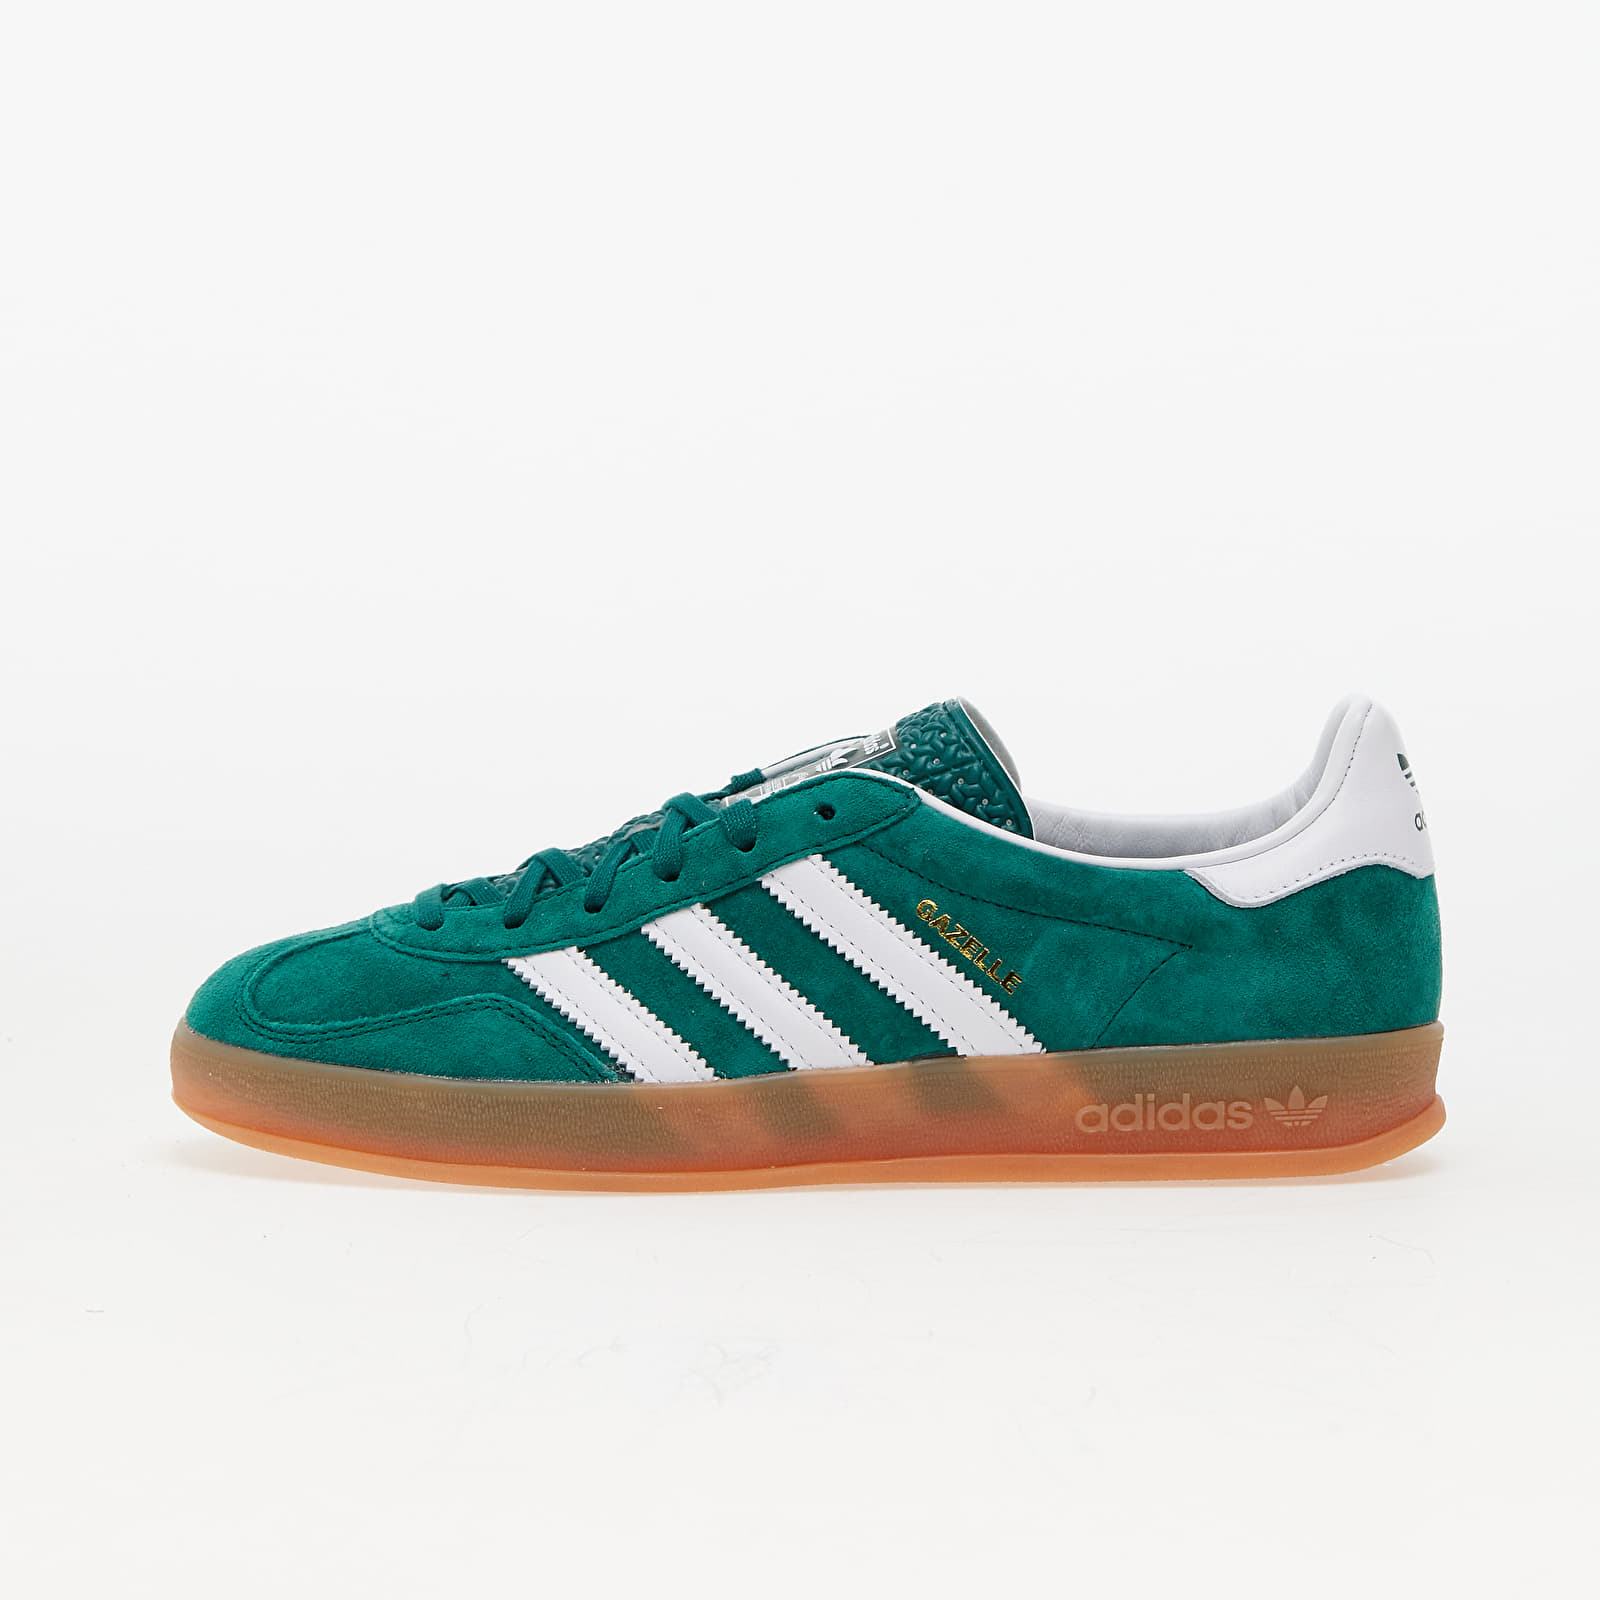 Men's sneakers and shoes adidas Gazelle Indoor Collegiate Green/ Ftw White/ Gum2